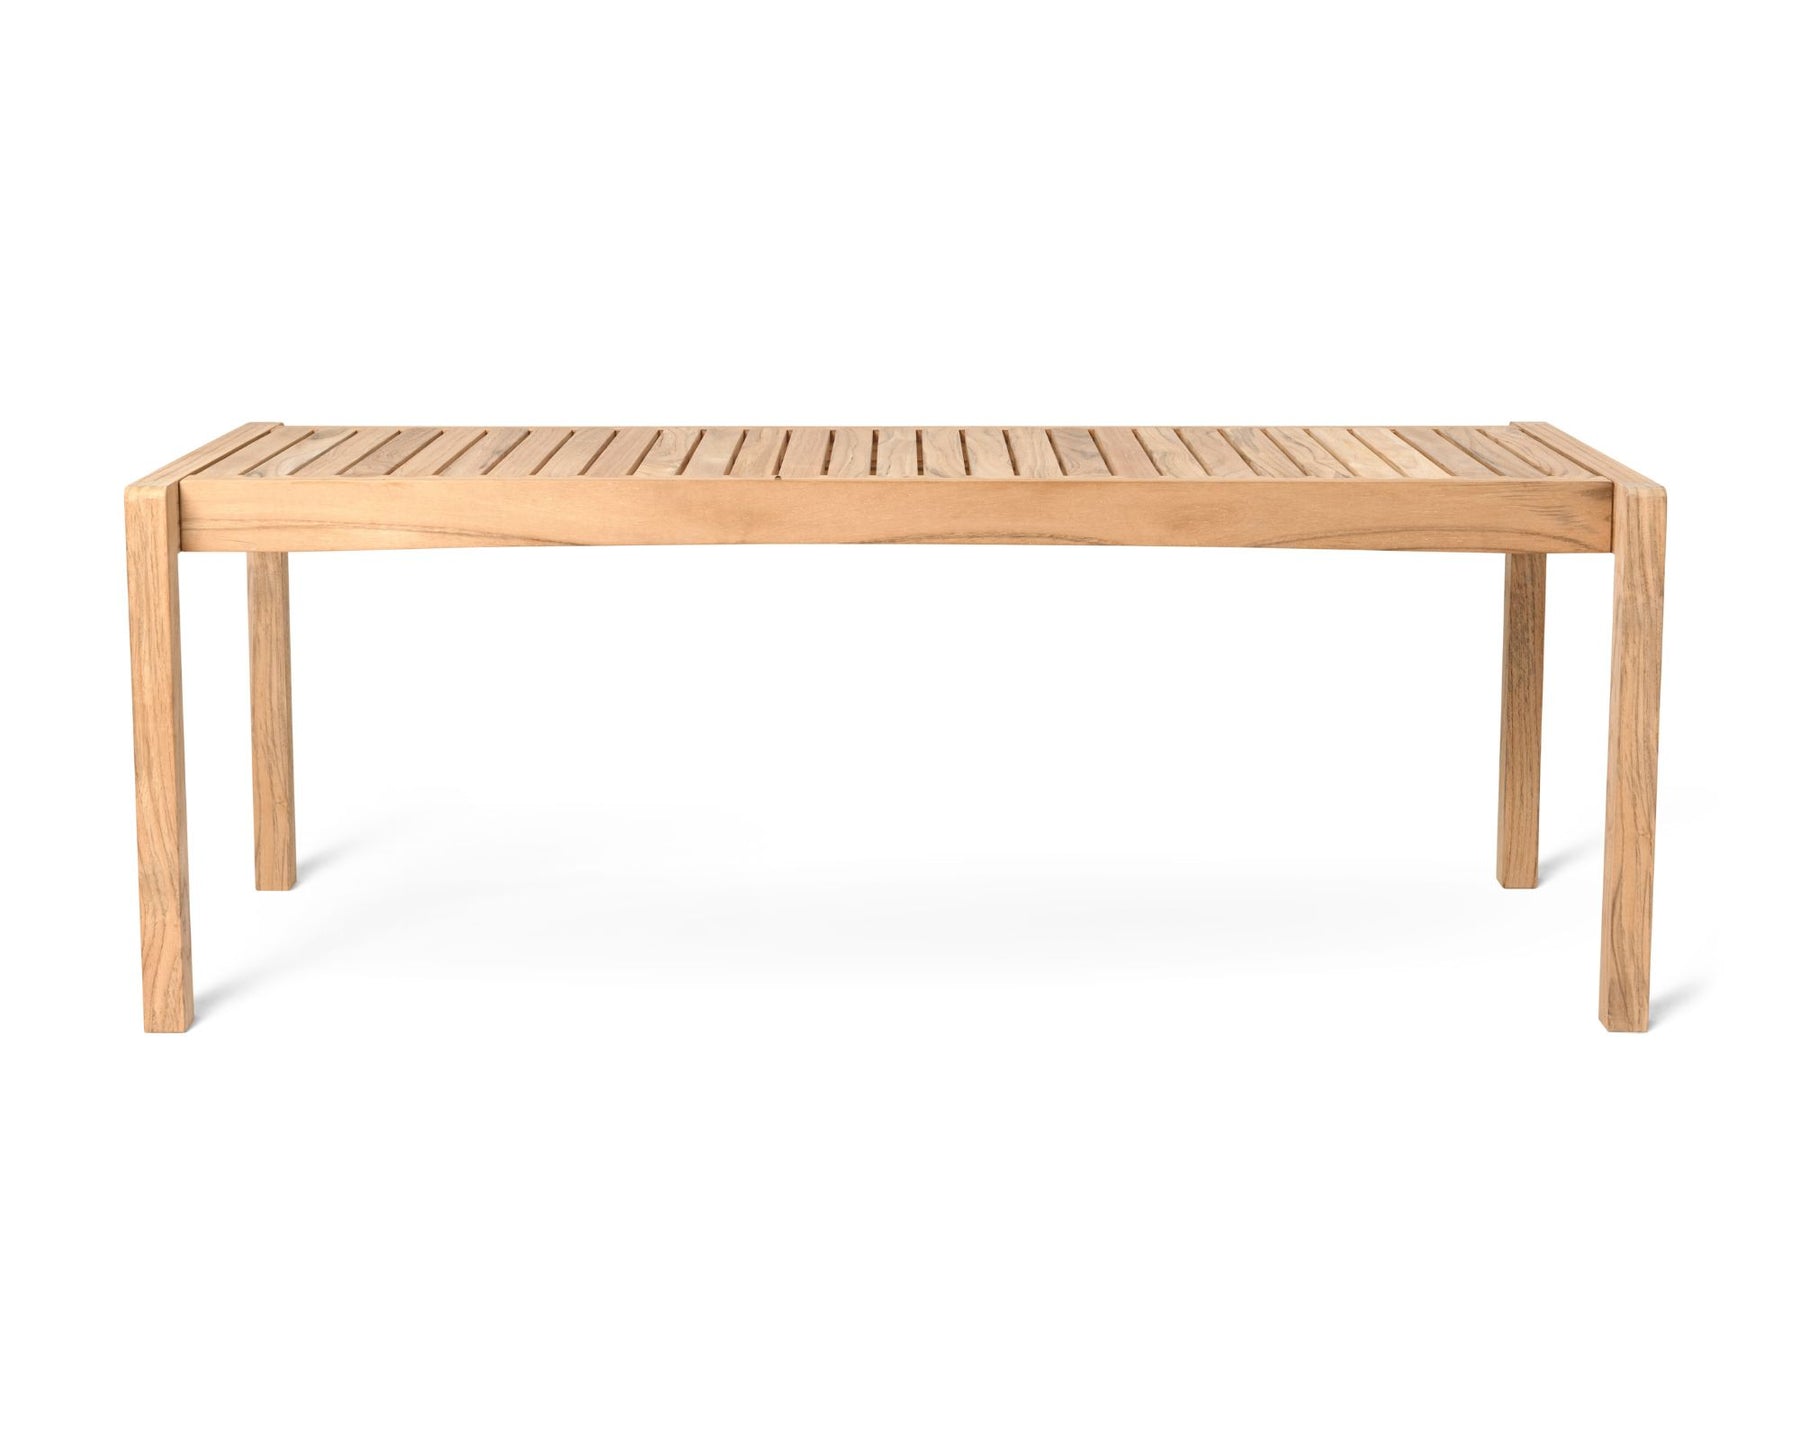 AH912 Outdoor Table Bench | DSHOP